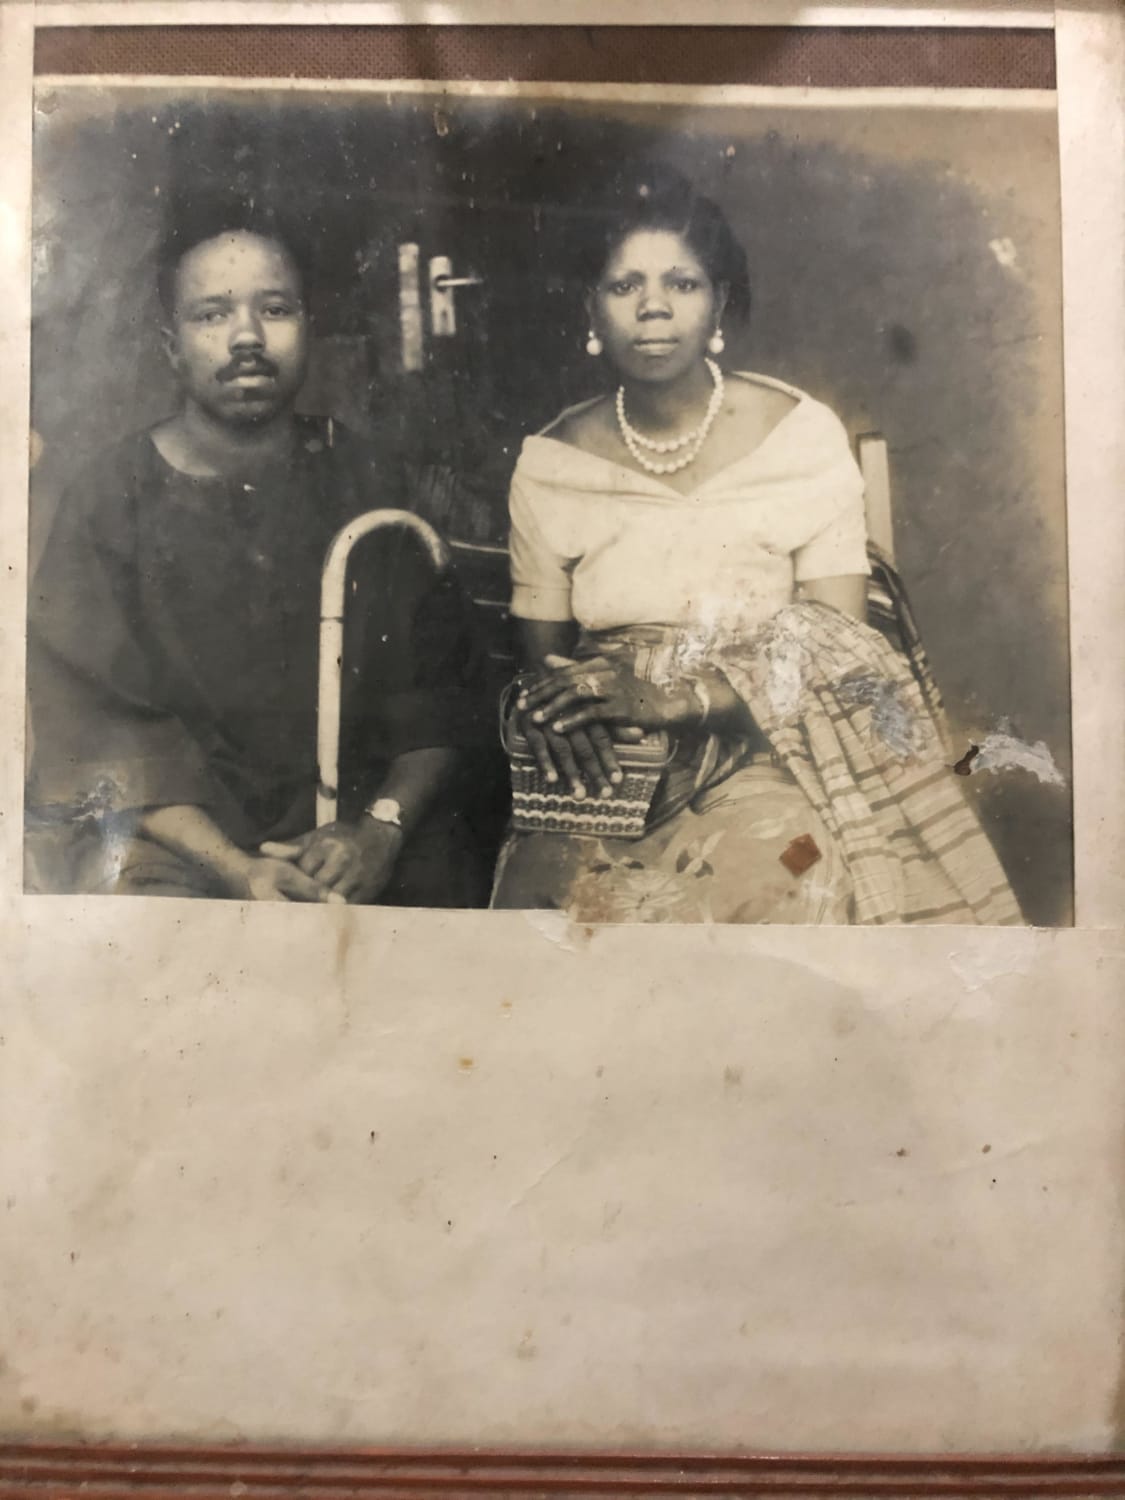 My grandparents in the late 1950s in the former Eastern Region of Nigeria